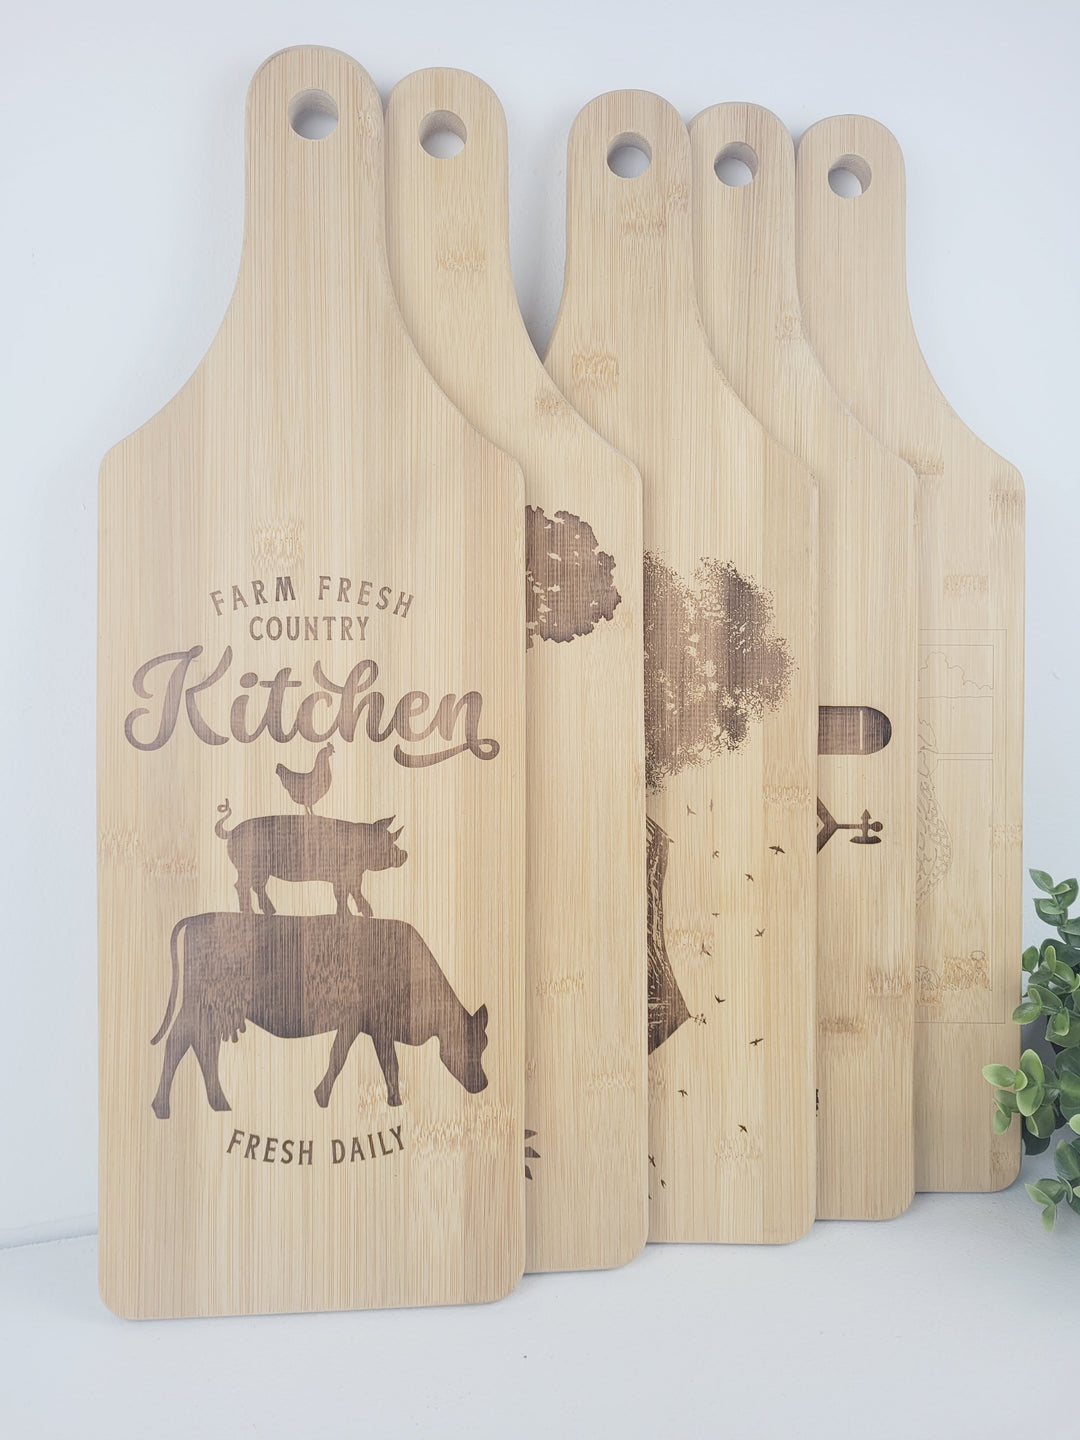 The Crafty Nerd, Engraved Bamboo Serving Board